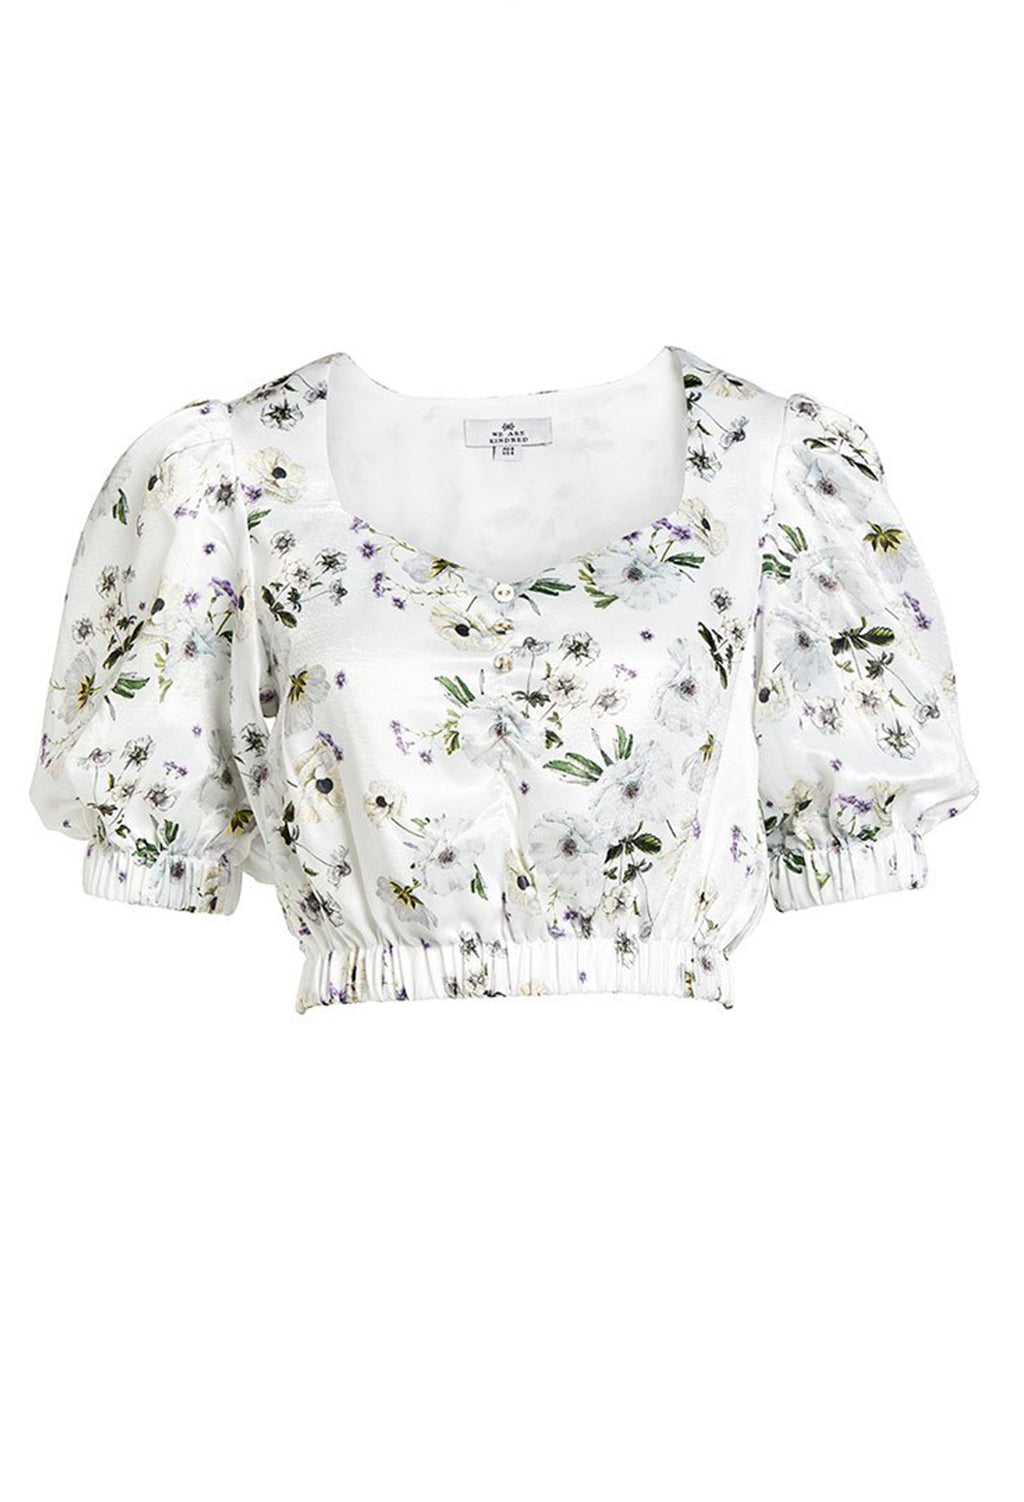 Style Odyssey | Frenchie Crop Top in White Bouquet by We Are Kindred We Are Kindred We Are Kindred We Are Kindred We Are Kindred We Are Kindred We Are Kindred We Are Kindred We Are Kindred We Are Kindred We Are Kindred We Are Kindred We Are Kindred We Are Kindred We Are Kindred